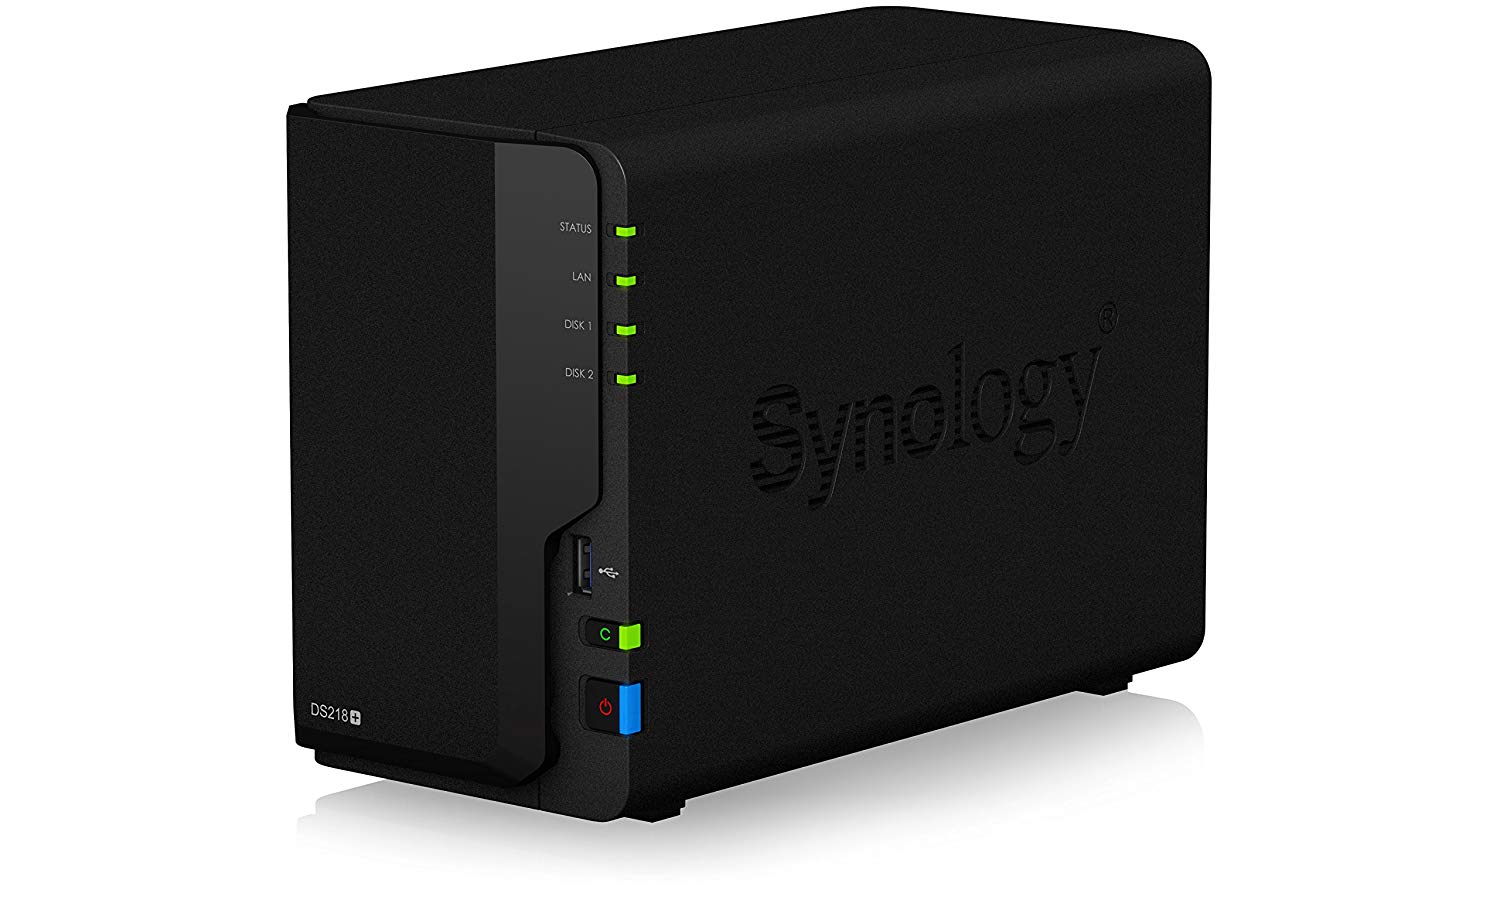 Synology DS218+ NAS - Choosing A Replacement NAS